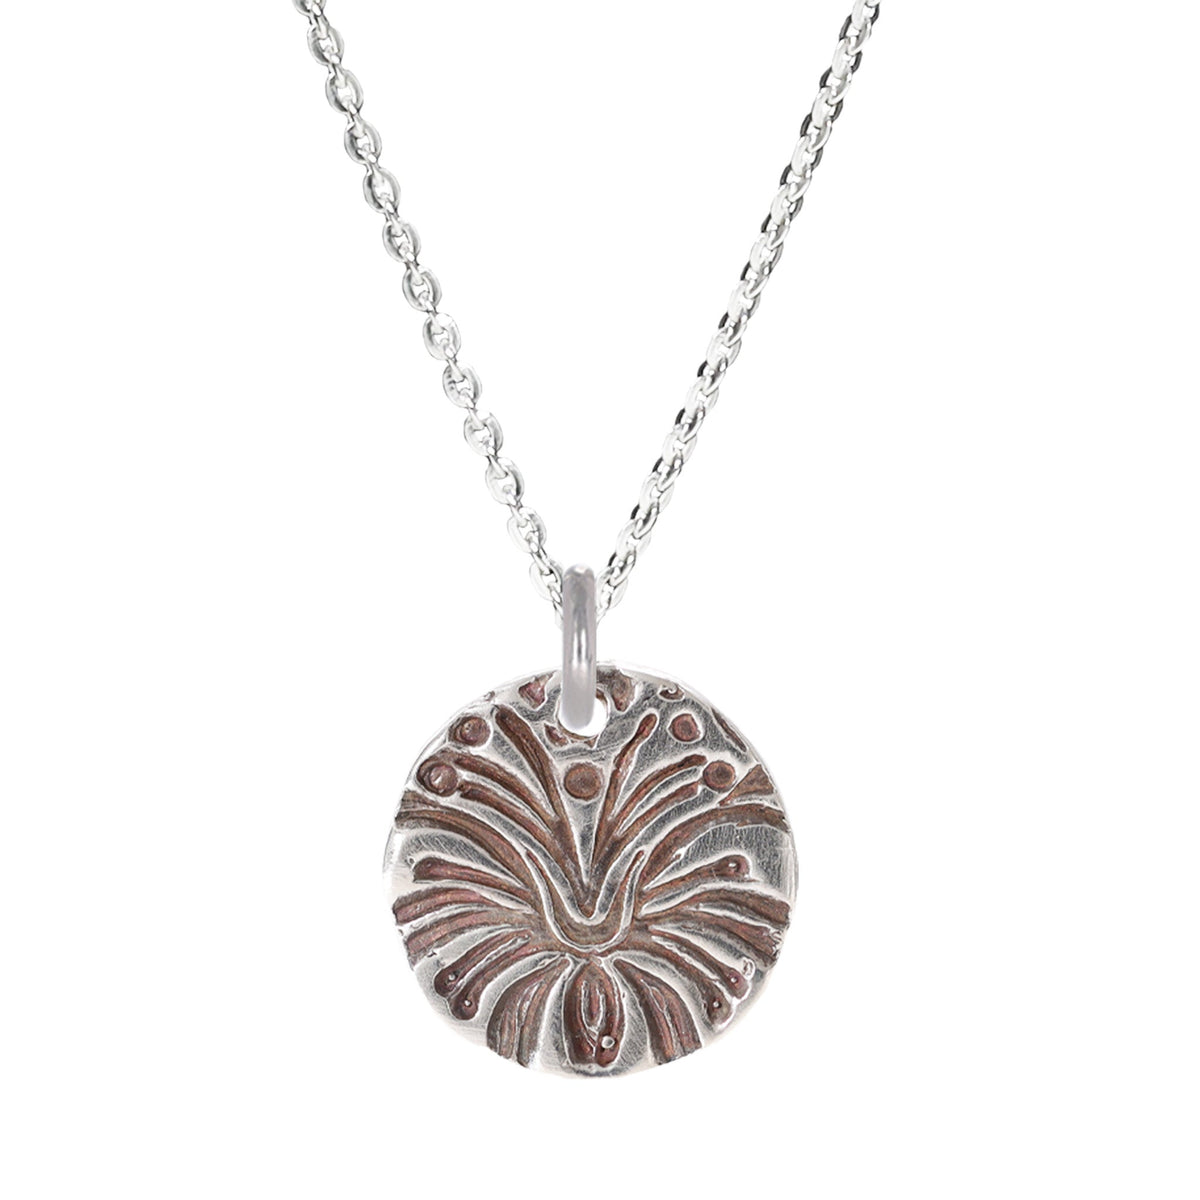 Hibiscus Textured Small Sterling Silver Necklace on a Sterling Silver Cable Chain